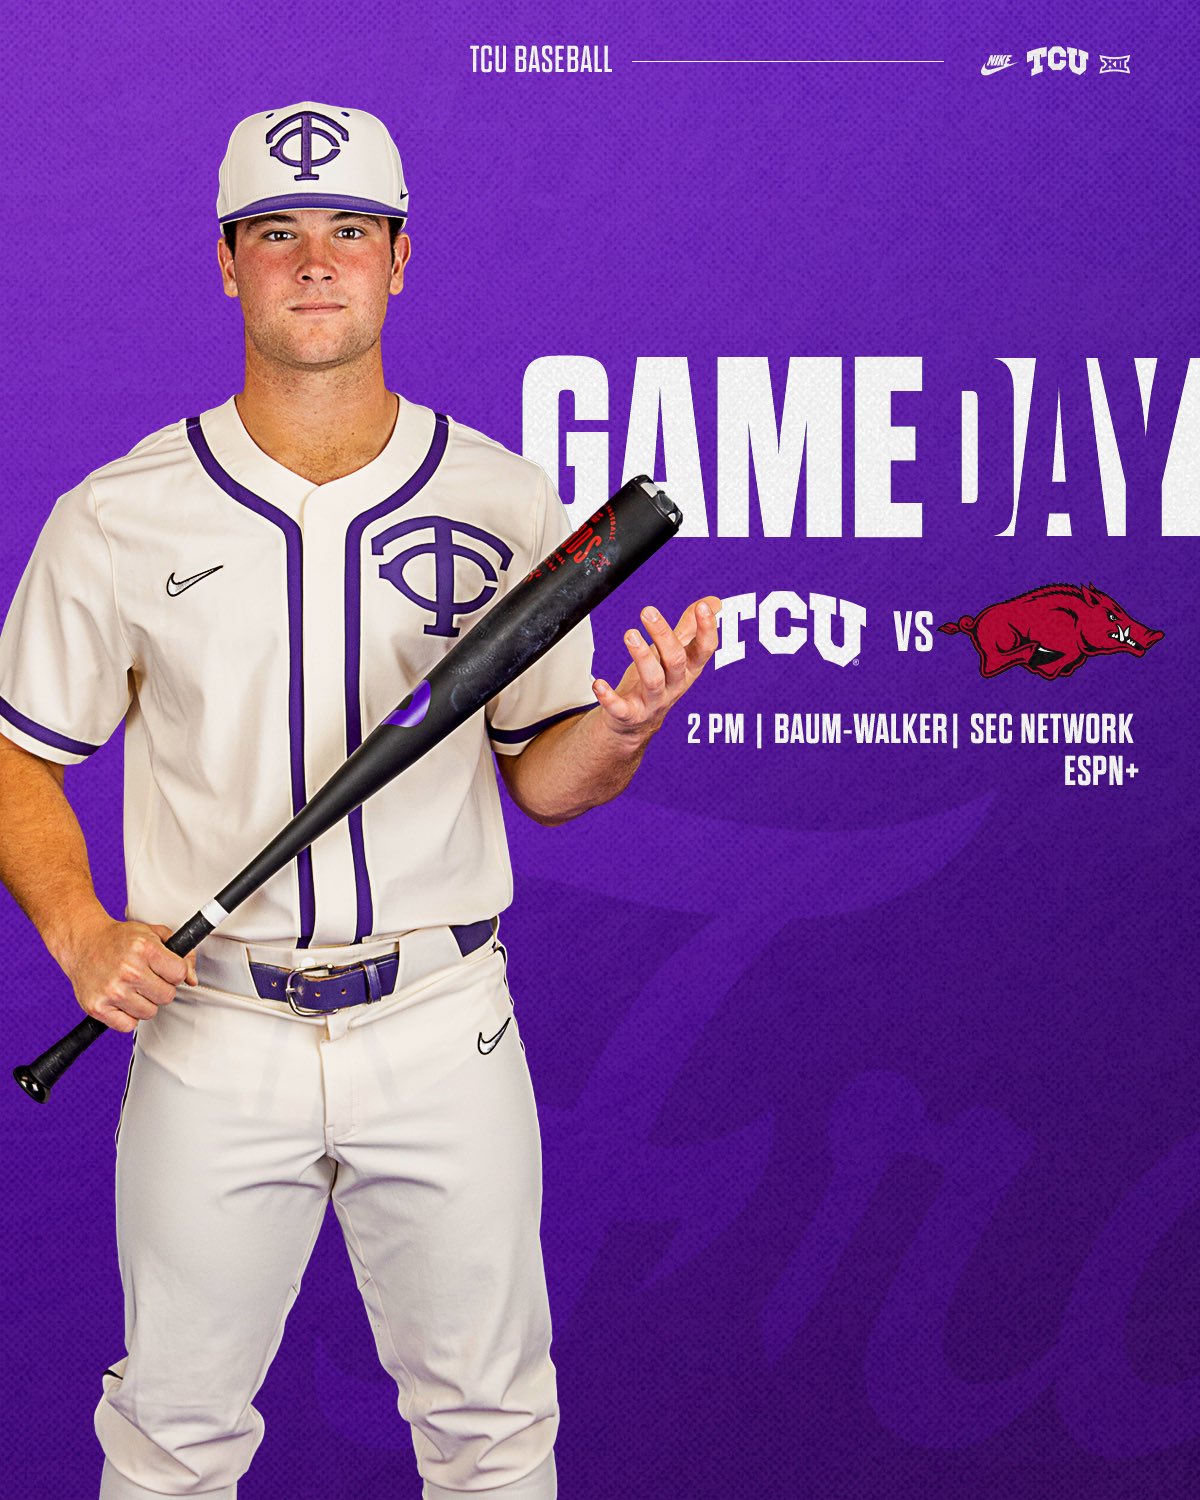 TCU Baseball on X: Let's try this again! See you at 2! 🔗 https